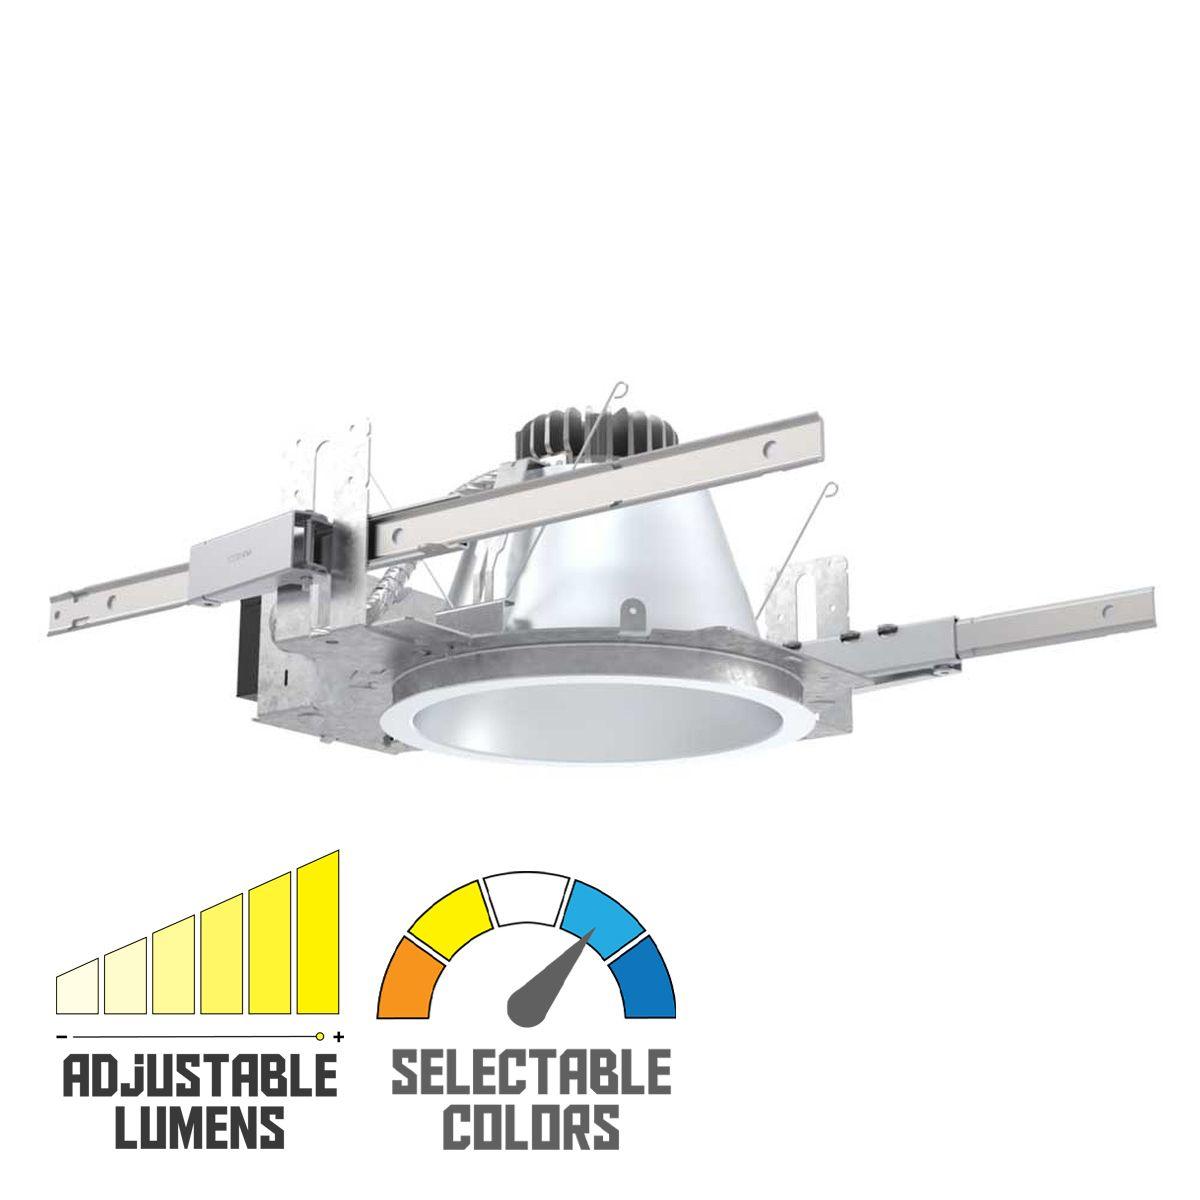 Lithonia LDN8 Commercial LED Recessed Downlight, 2600 Lumens Adjustable, Selectable CCT, 30K/35K/40K/50K, Battery Backup Included (Reflector Sold Separately)